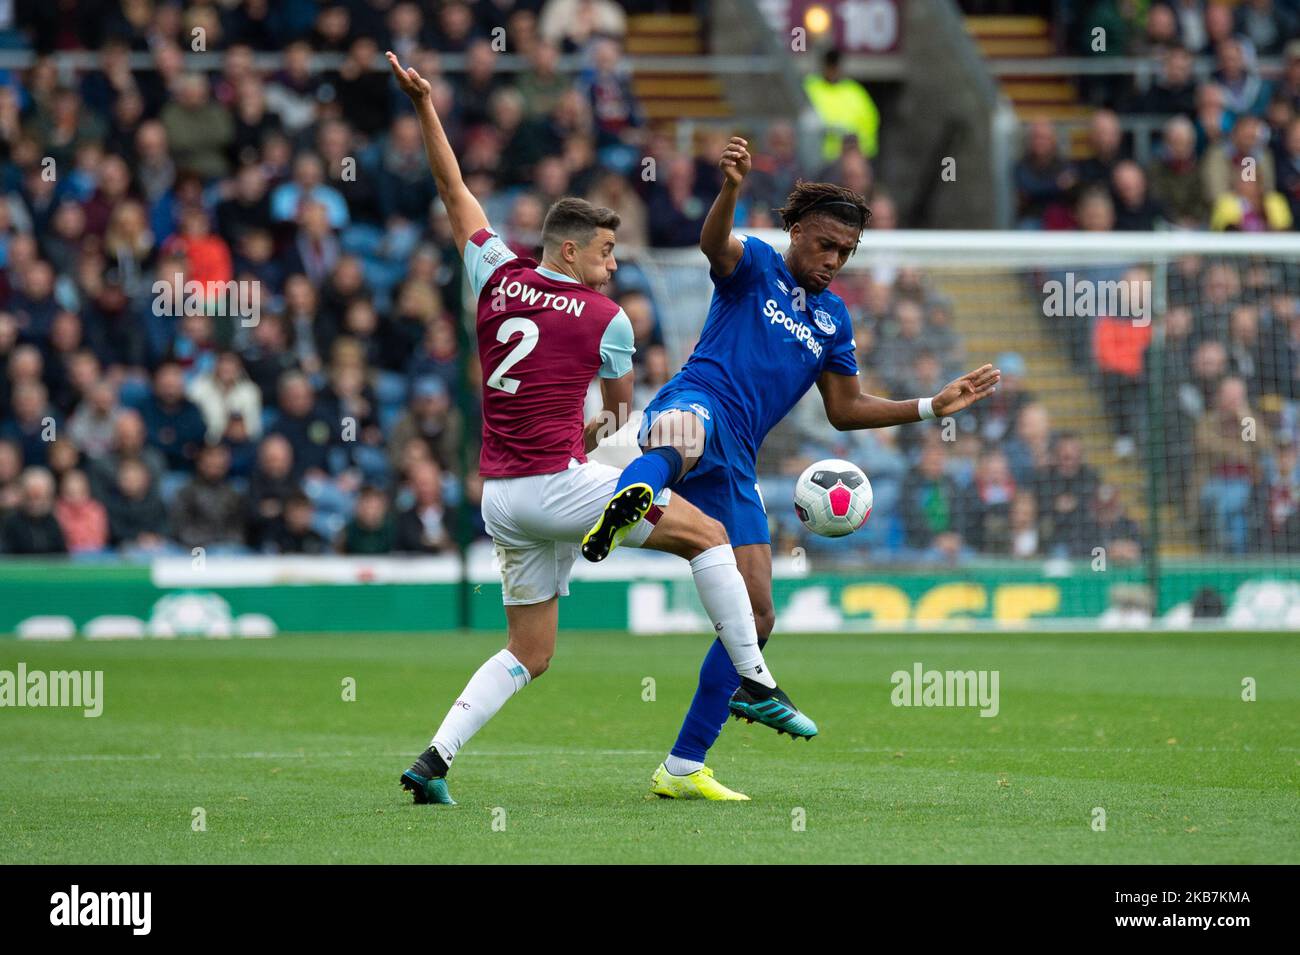 Alex Iwobi of Everton battles with Matthew Lowton of Burnley during the Premier League match between Burnley and Everton at Turf Moor, Burnley on Saturday 5th October 2019. (Credit: Pat Scaasi | MI News) Photograph may only be used for newspaper and/or magazine editorial purposes, license required for commercial use (Photo by MI News/NurPhoto) Stock Photo